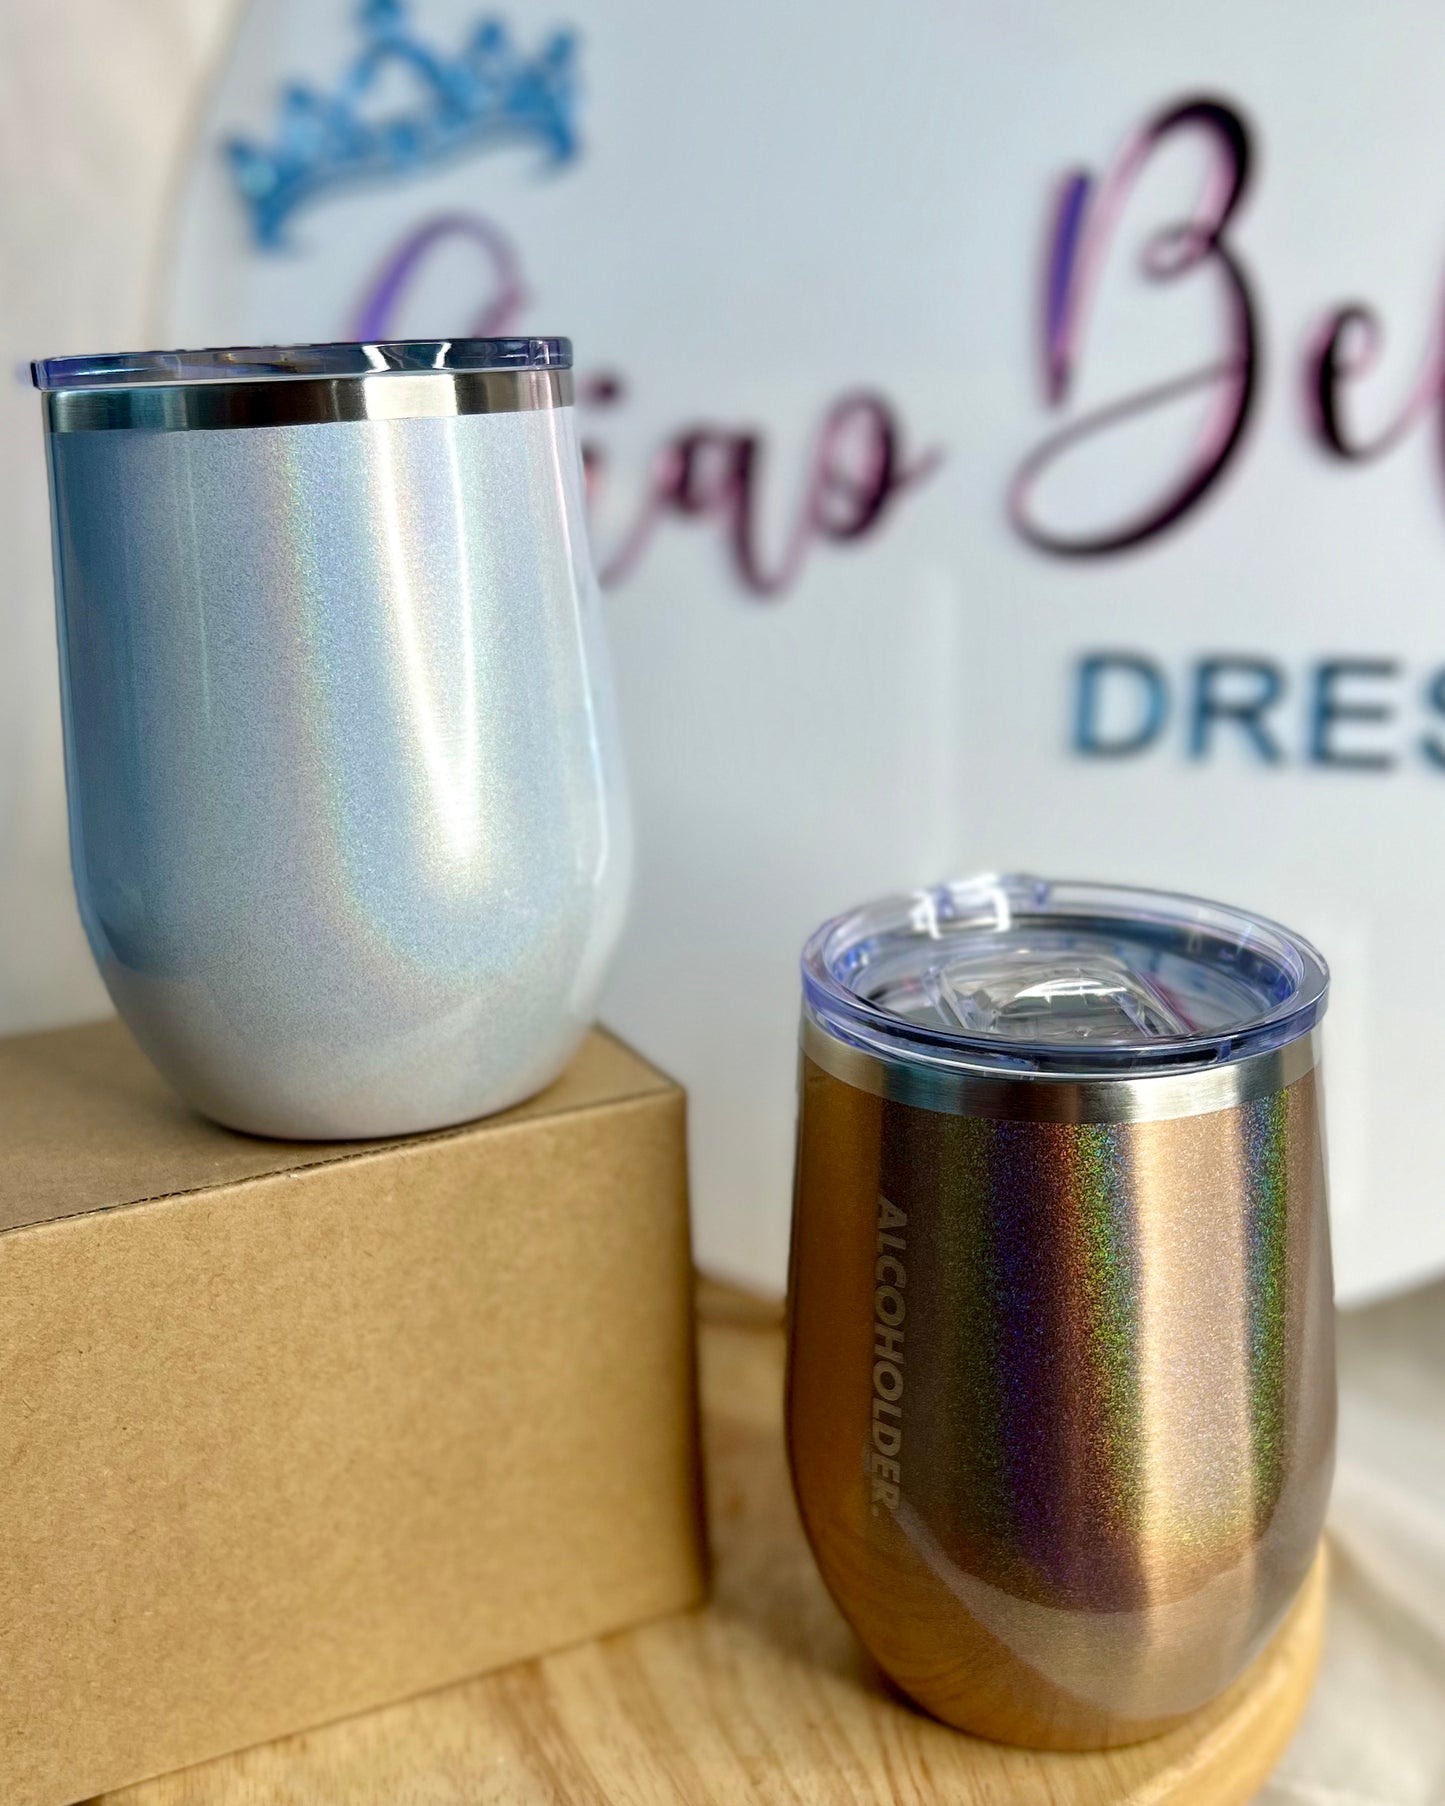 Stemless Vacuum Insulated Tumbler: 
Shaped for comfort and designed for practicality, the Stemless Insulated Tumbler will hold 415ml of liquid and keep it cool for up to 12hrs. What's neat is it'll al - Ciao Bella Dresses 